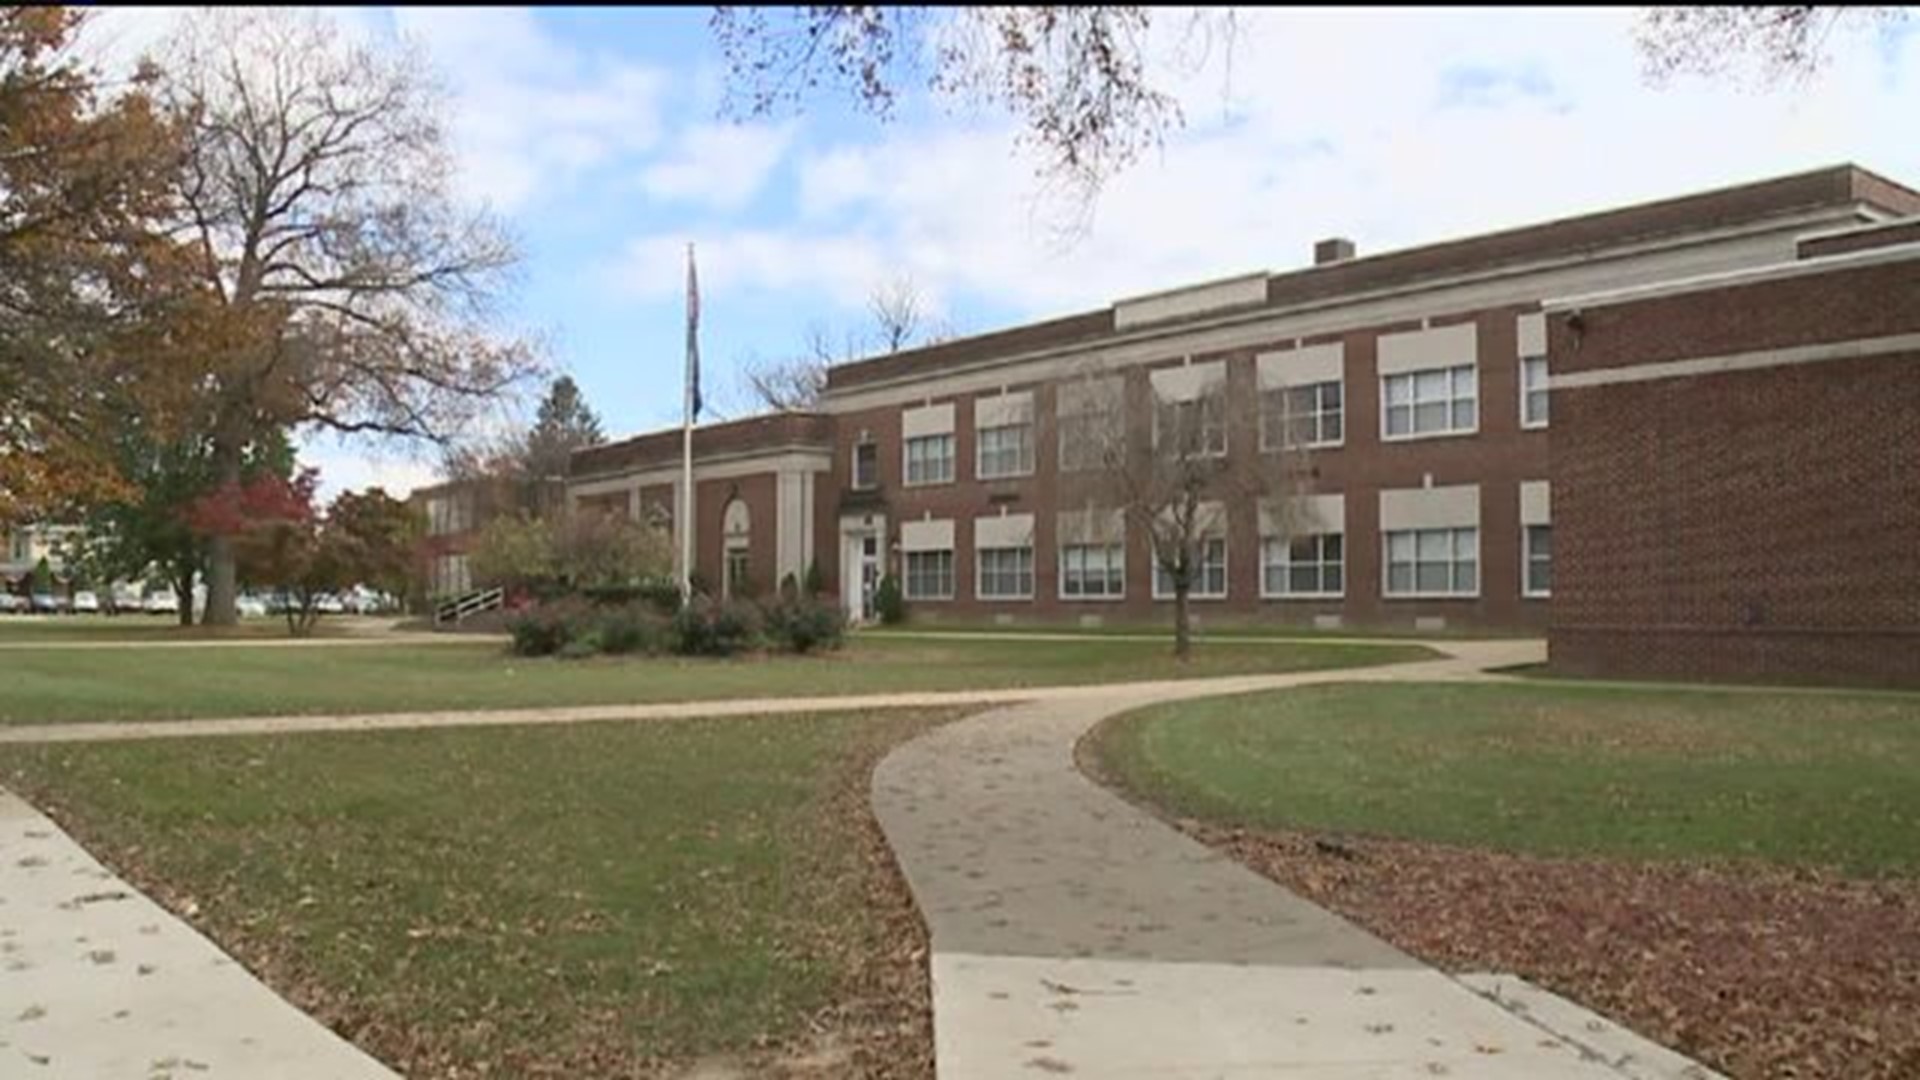 Security Breach at Lewisburg Area School District